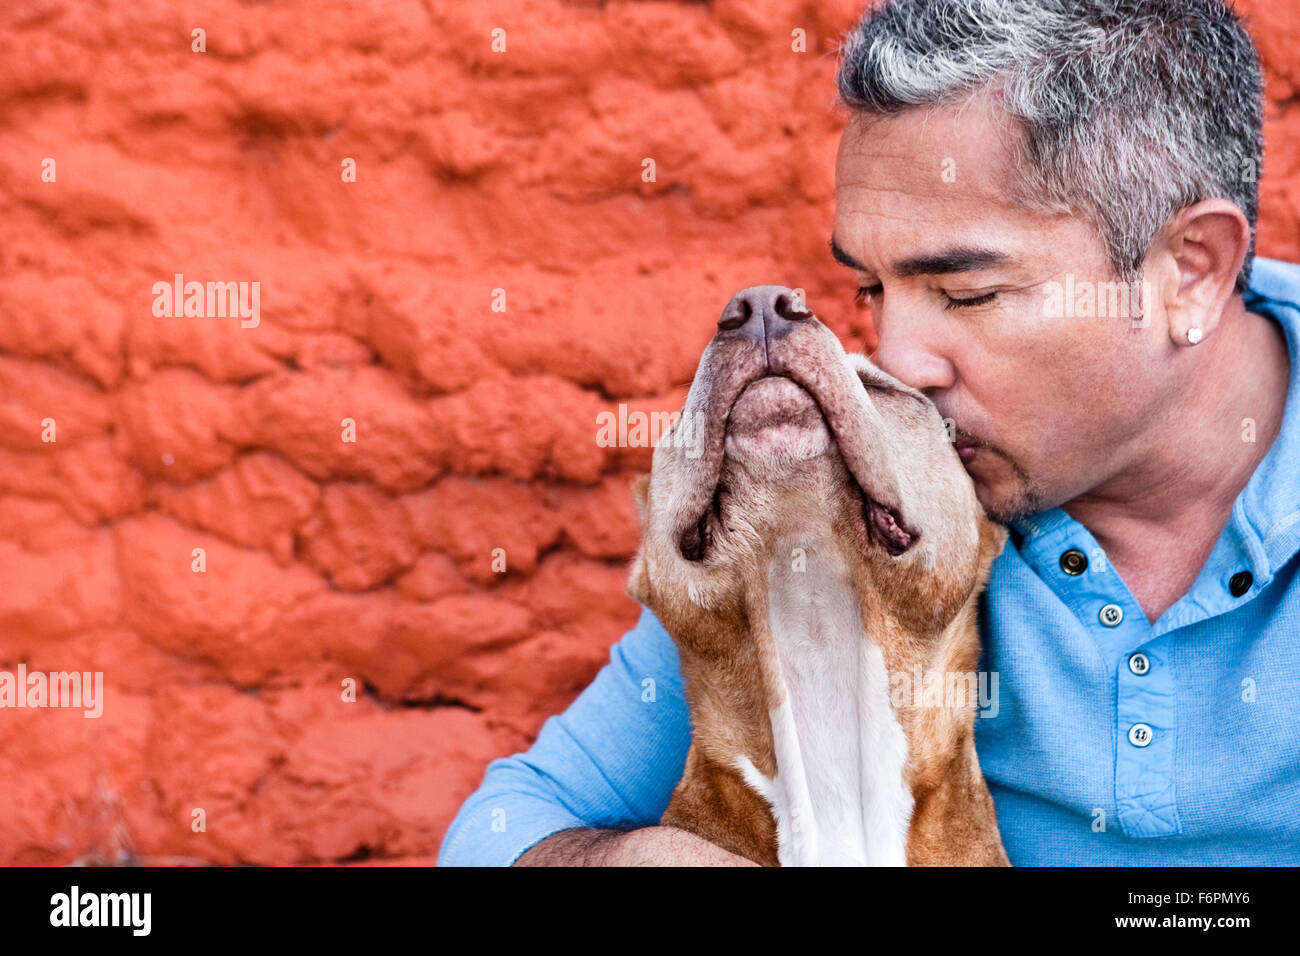 Dog Whisperer Ceasr Millan at ranch shows love and affection kissing pitbull dog Daddy in front of painted red stone wall Stock Photo